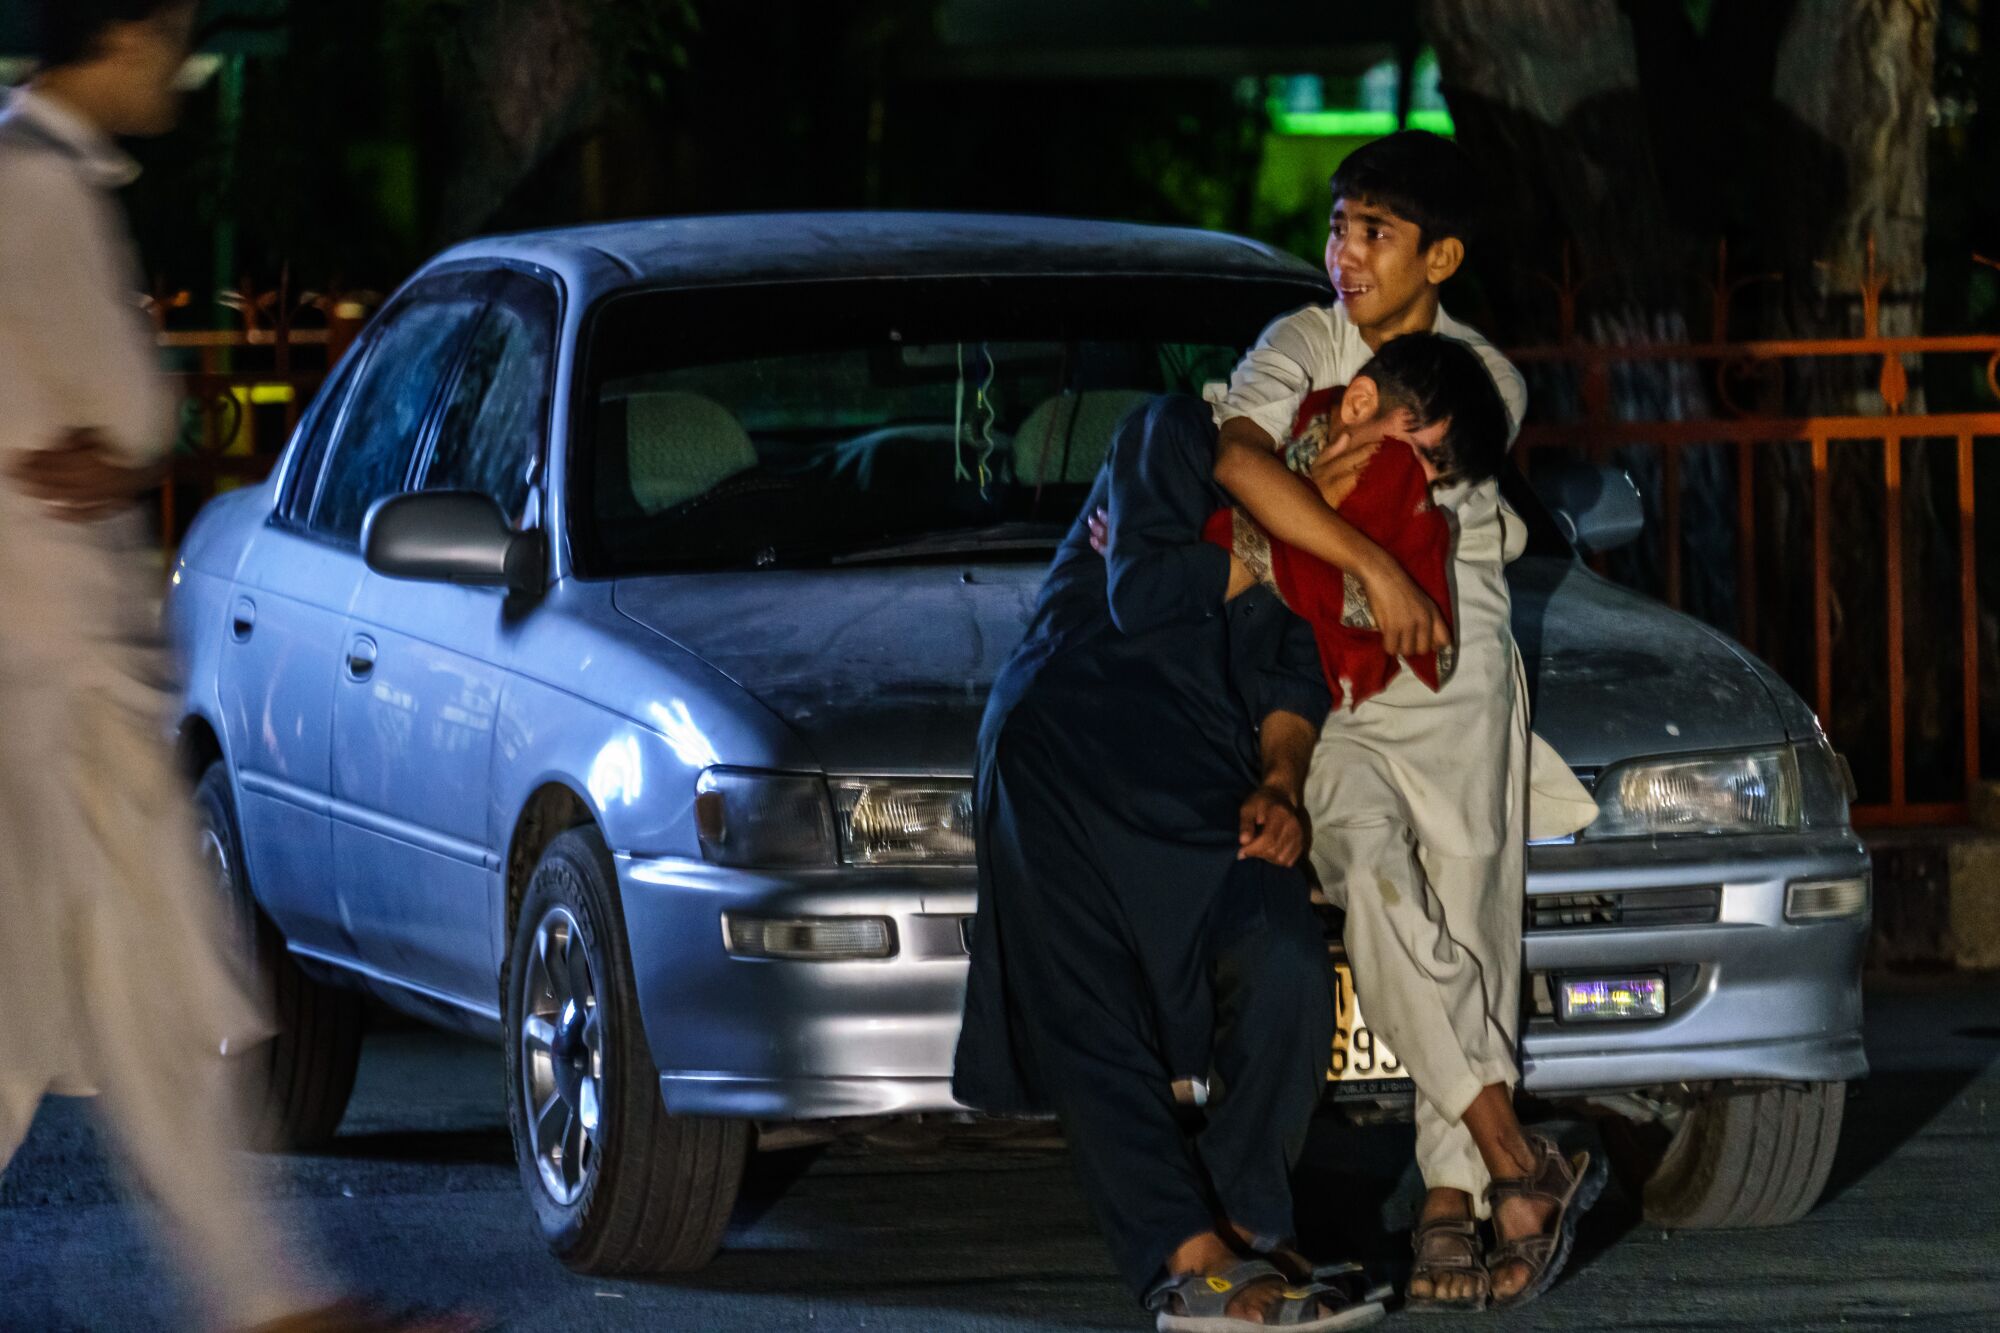 Two boys embrace each other  next to a car